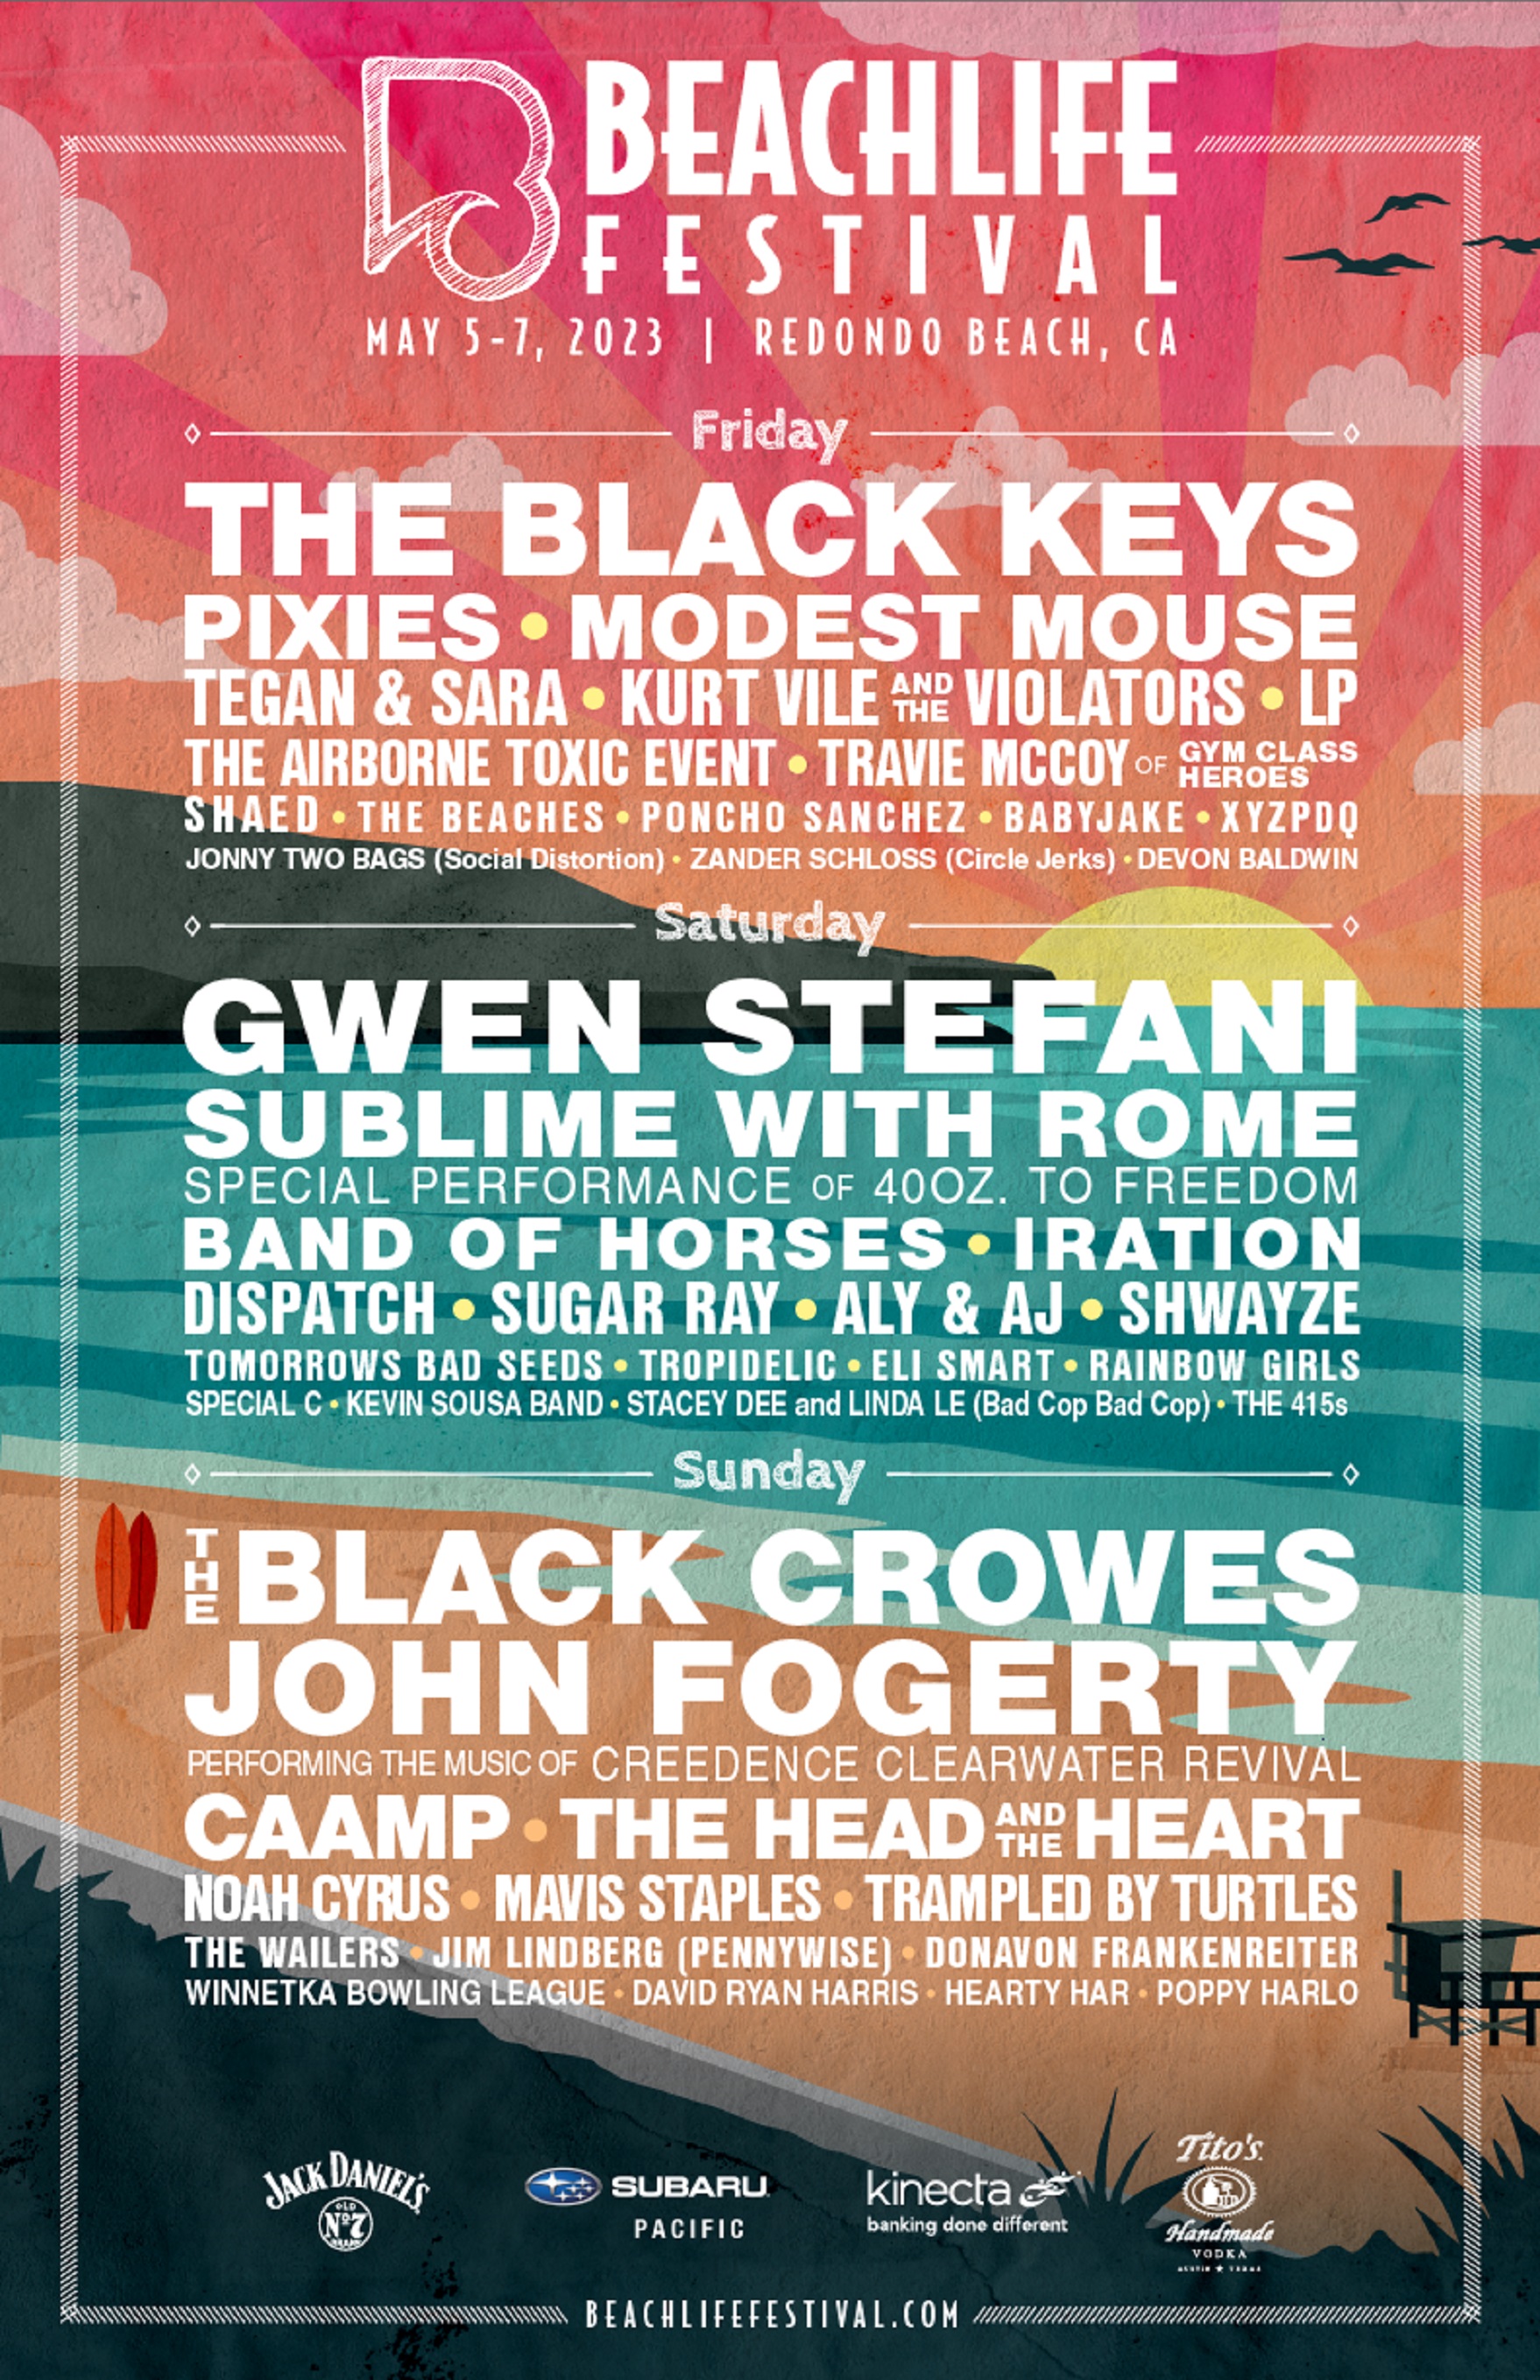 TUNE IN: BeachLife Festival Live Stream -- Catch The Black Keys, The Black Crowes, John Fogerty and more this weekend!